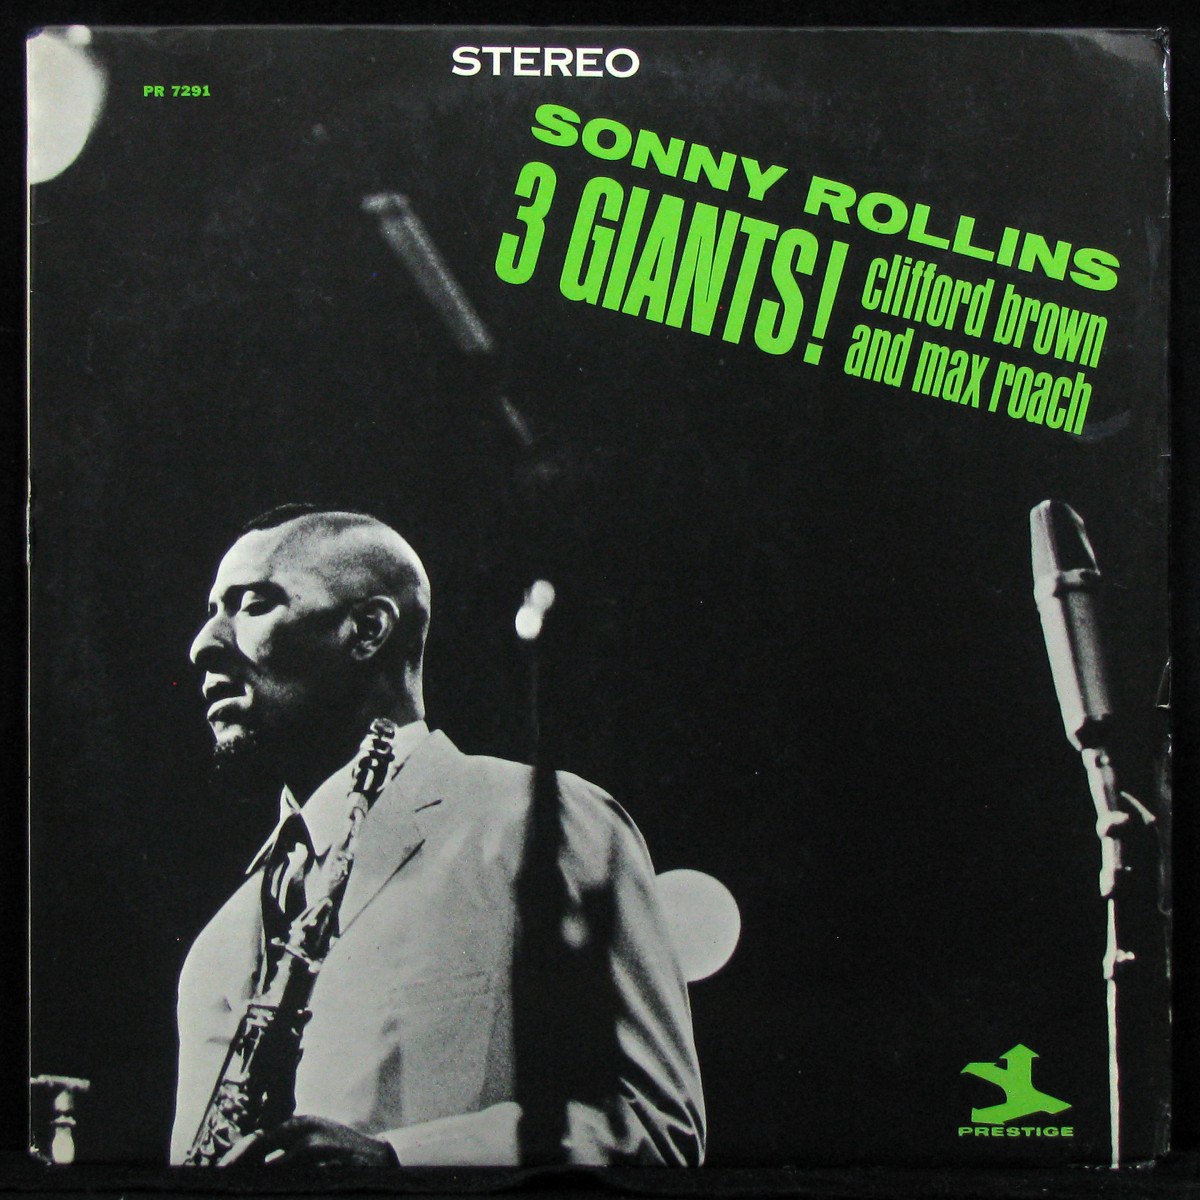 LP Sonny Rollins / Clifford Brown / Max Roach — 3 Giants! фото